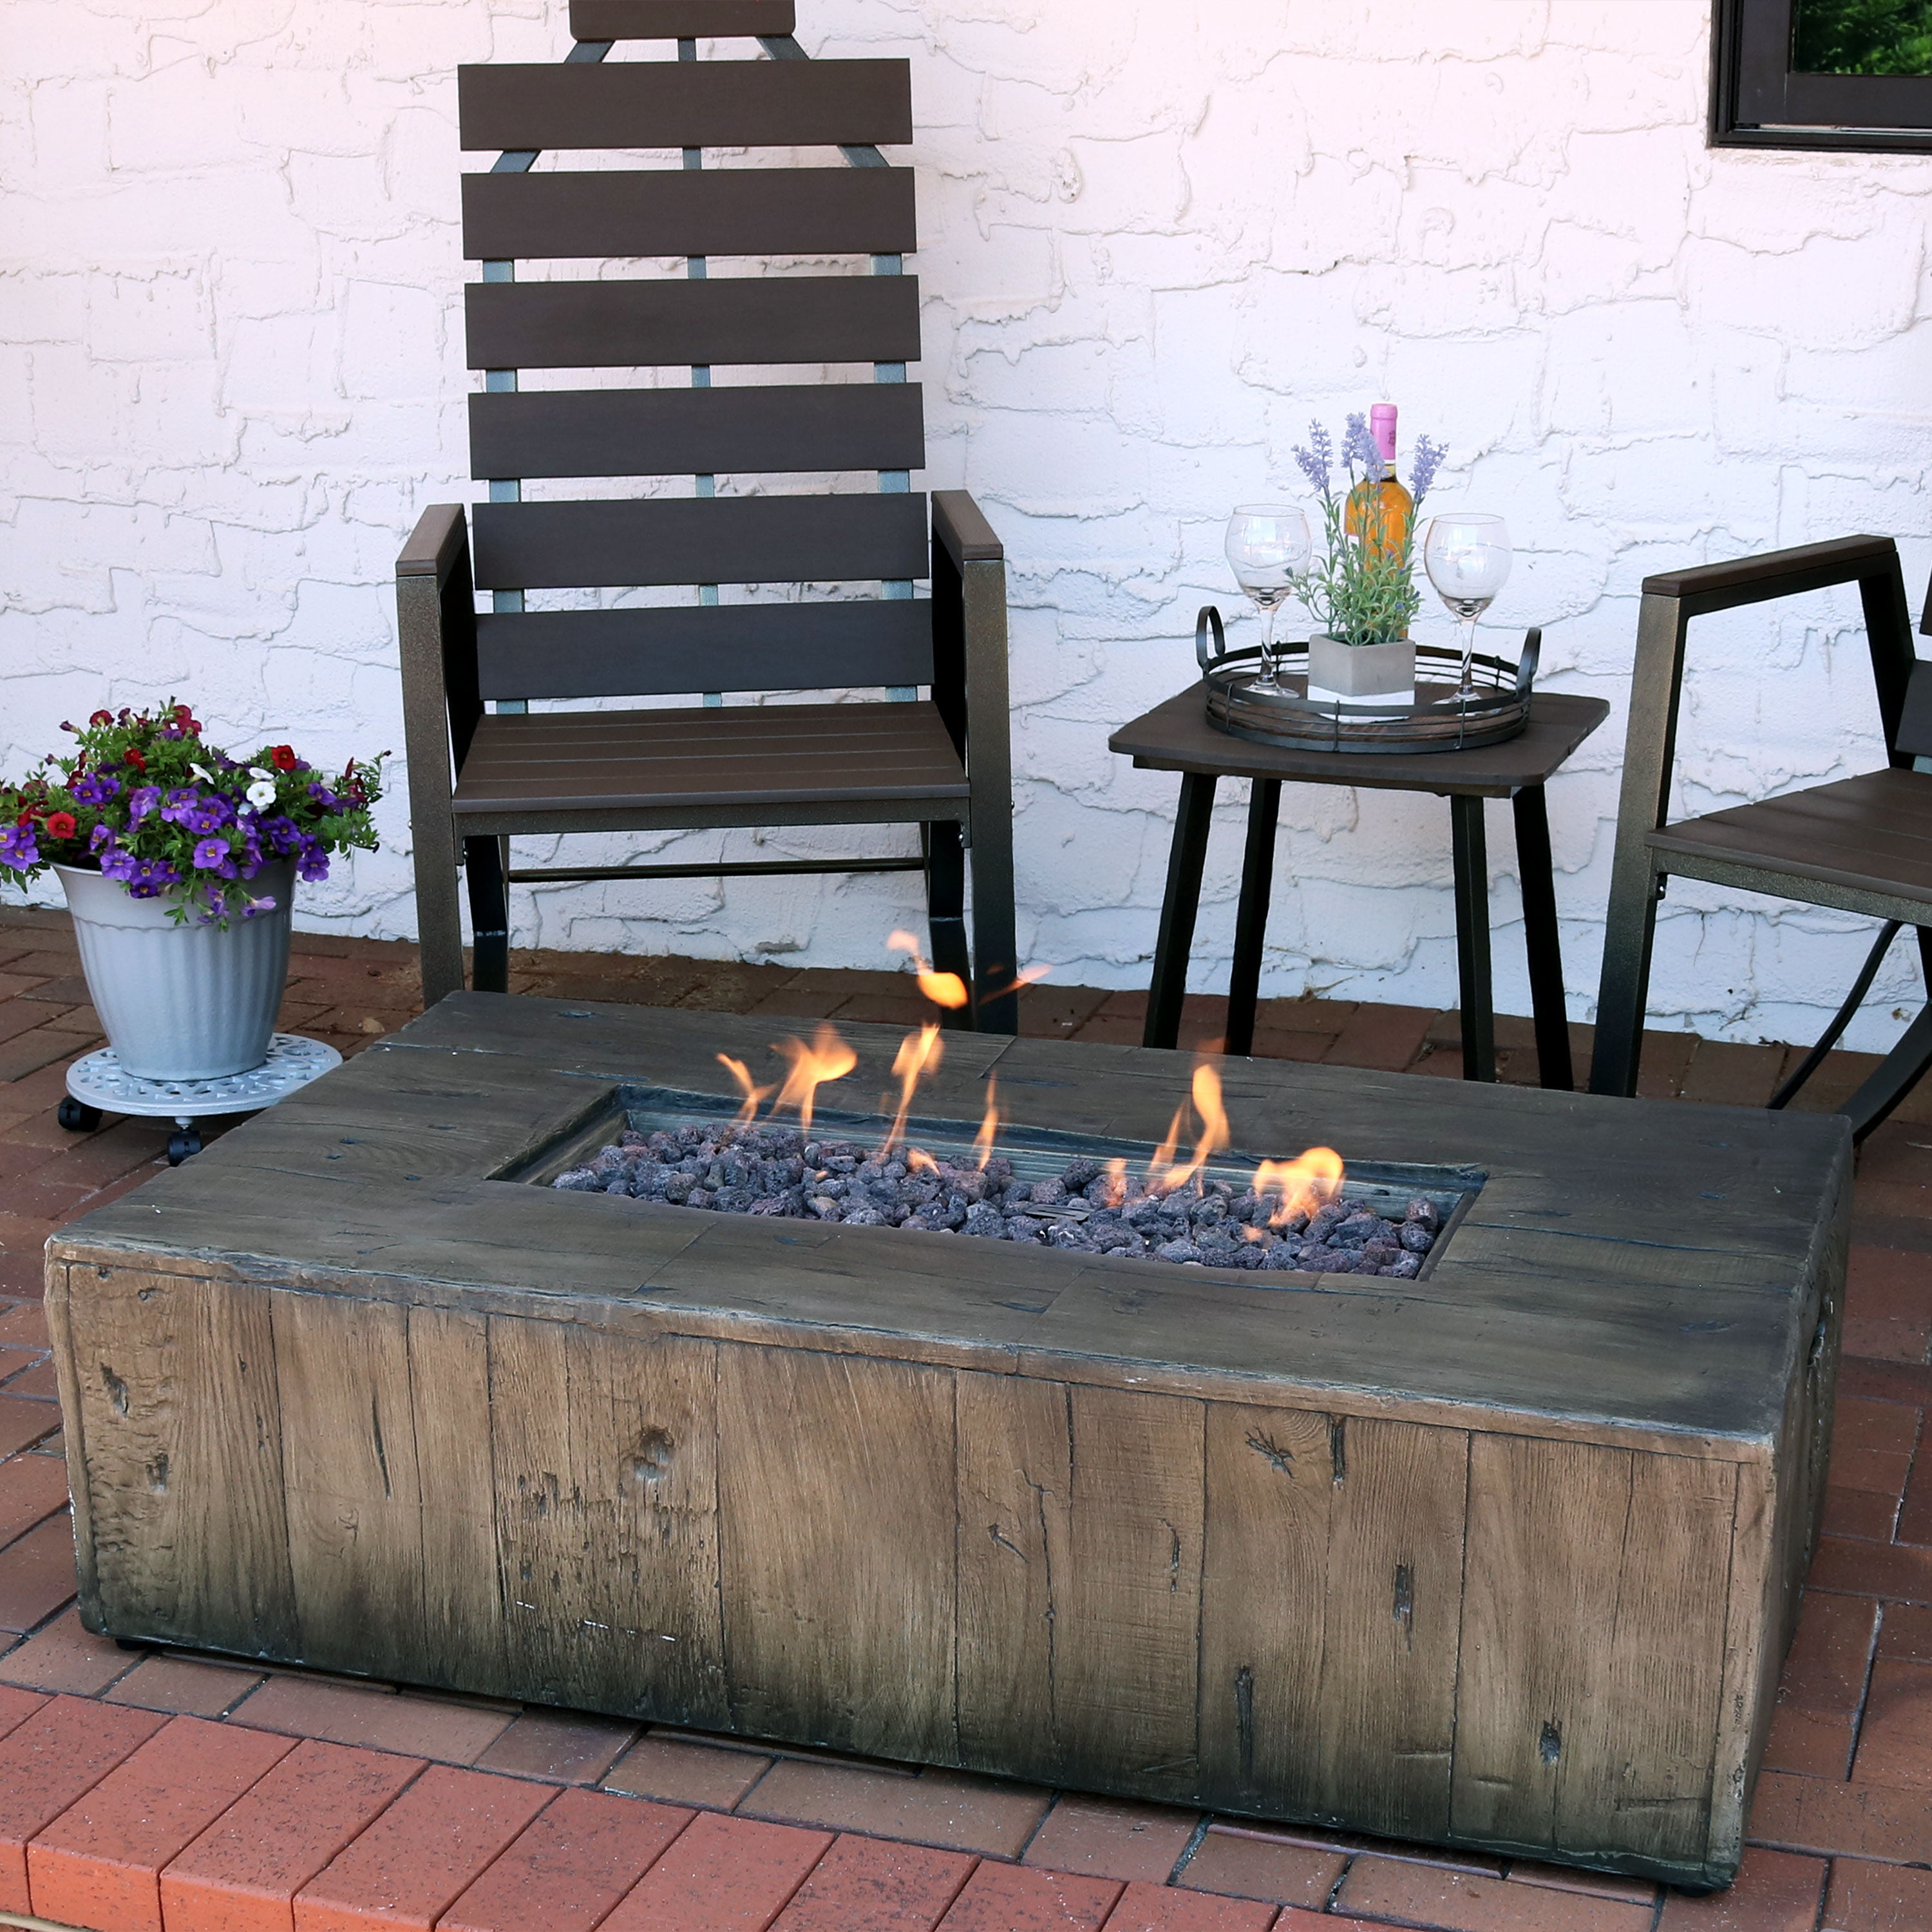 Sunnydaze Rustic Propane Gas Fire Pit, Propane Fire Pit With Chairs